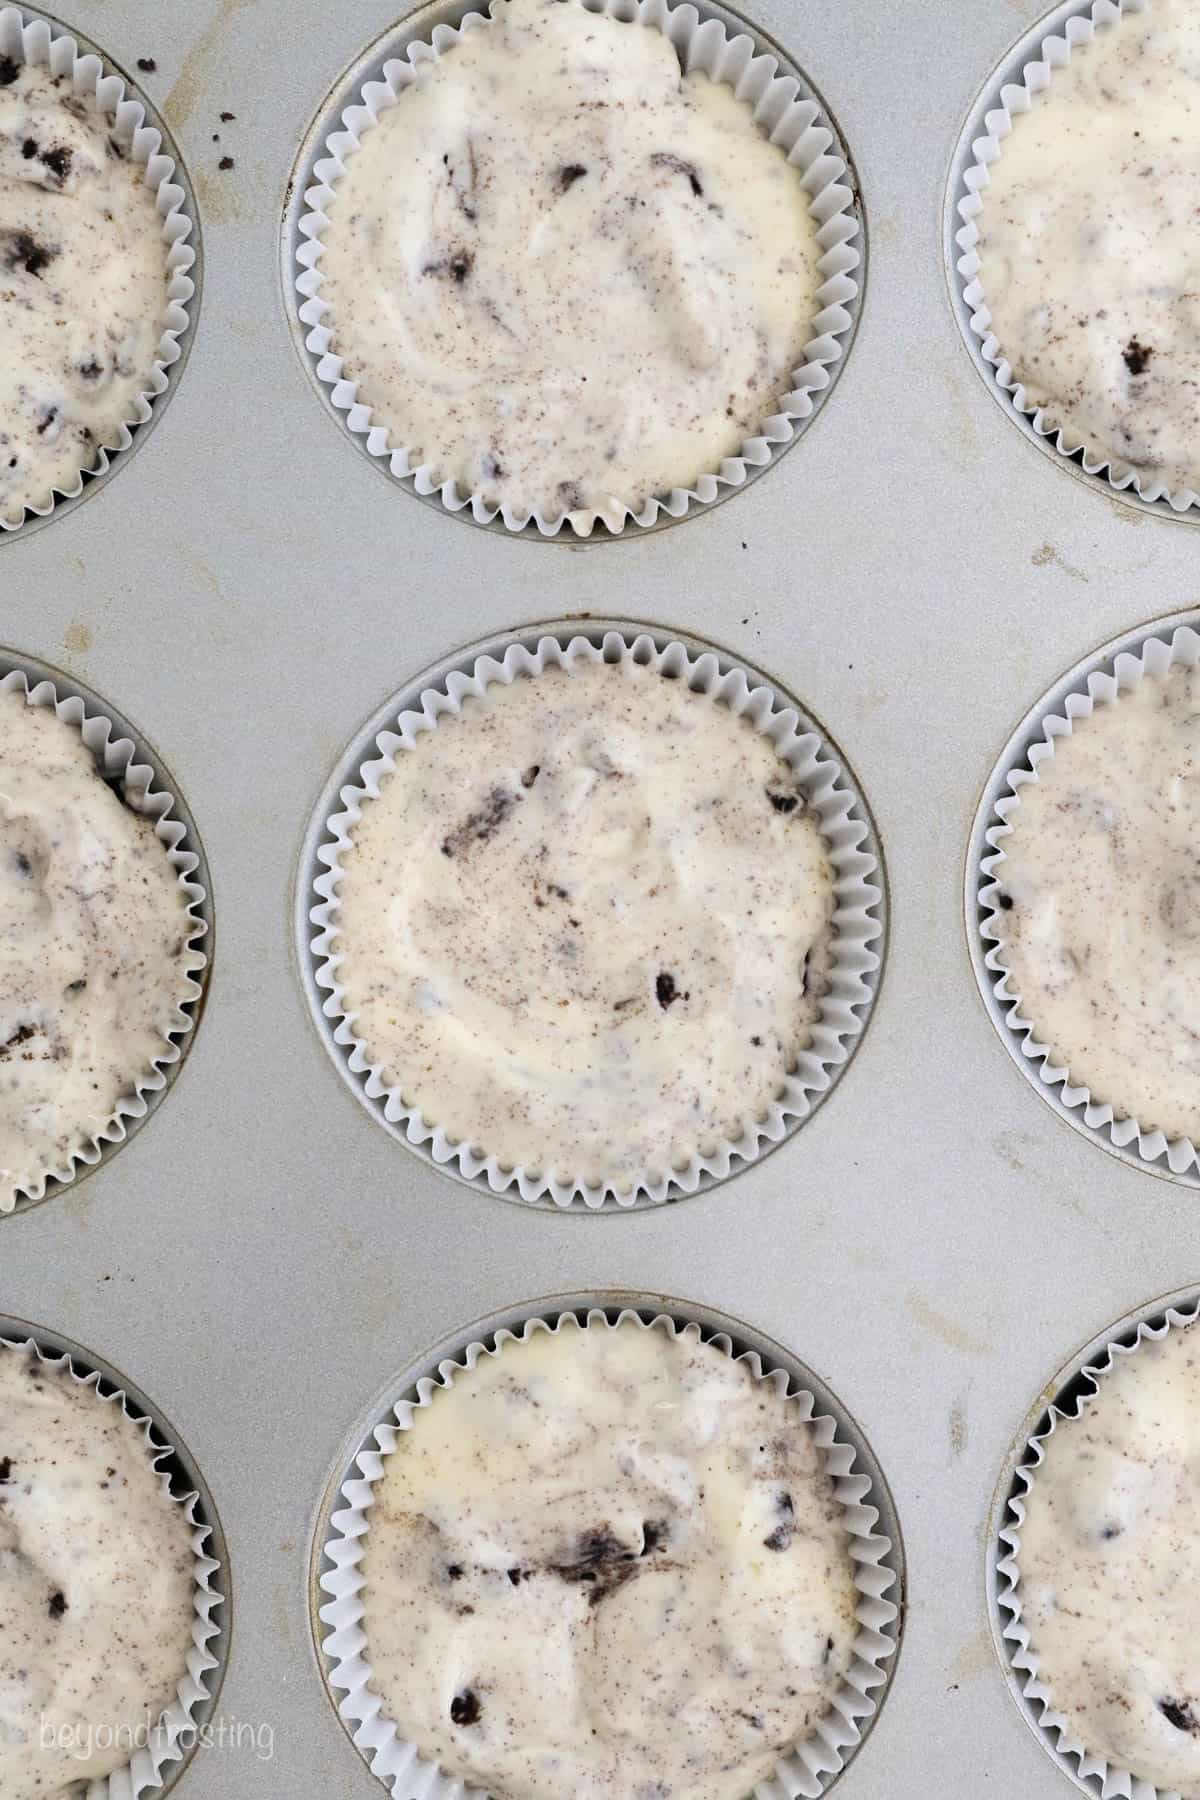 Baking liners in a cupcake pan filled with Oreo crust and cheesecake filling